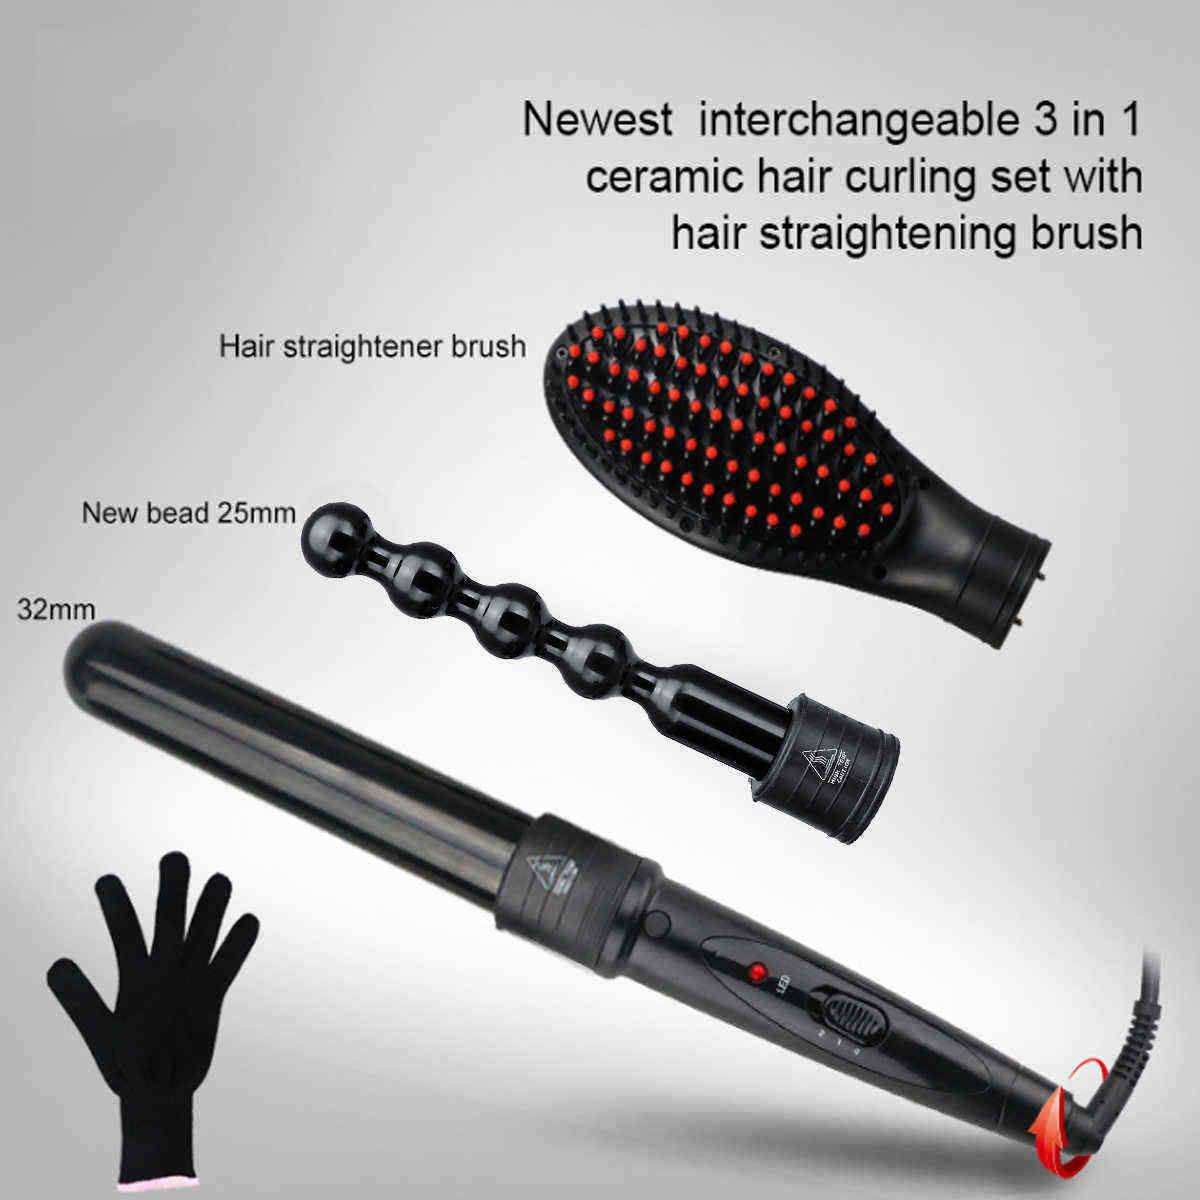 100-240V-85W-9-32mm-Ceramic-Hair-Curling-Wand-Salon-Curler-Tong-Styler-Straighter-Comb-Roller-1446706